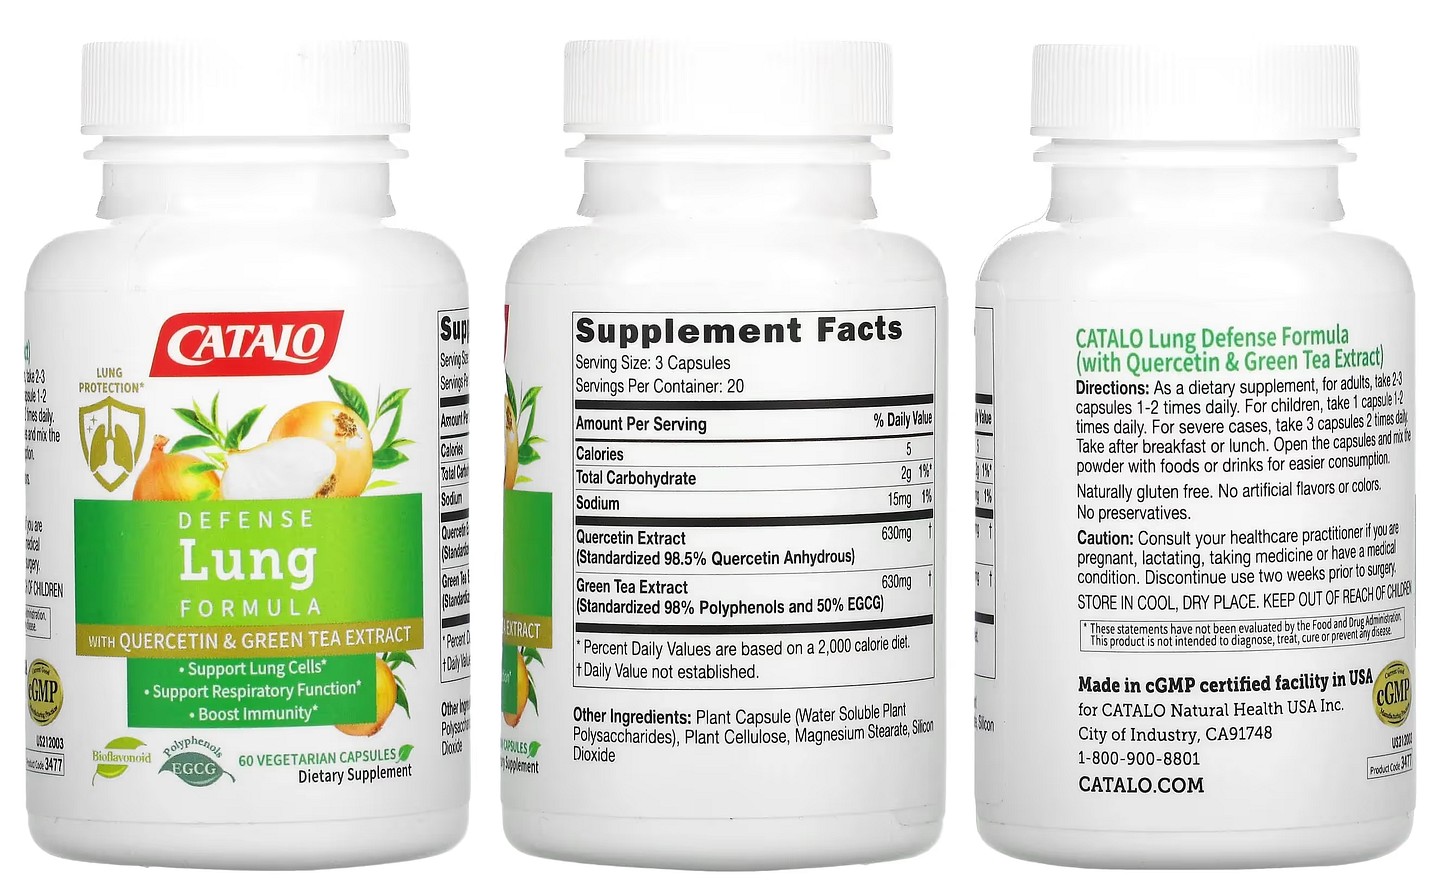 Catalo Naturals, Defense Lung Formula with Quercetin & Green Tea Extract packaging